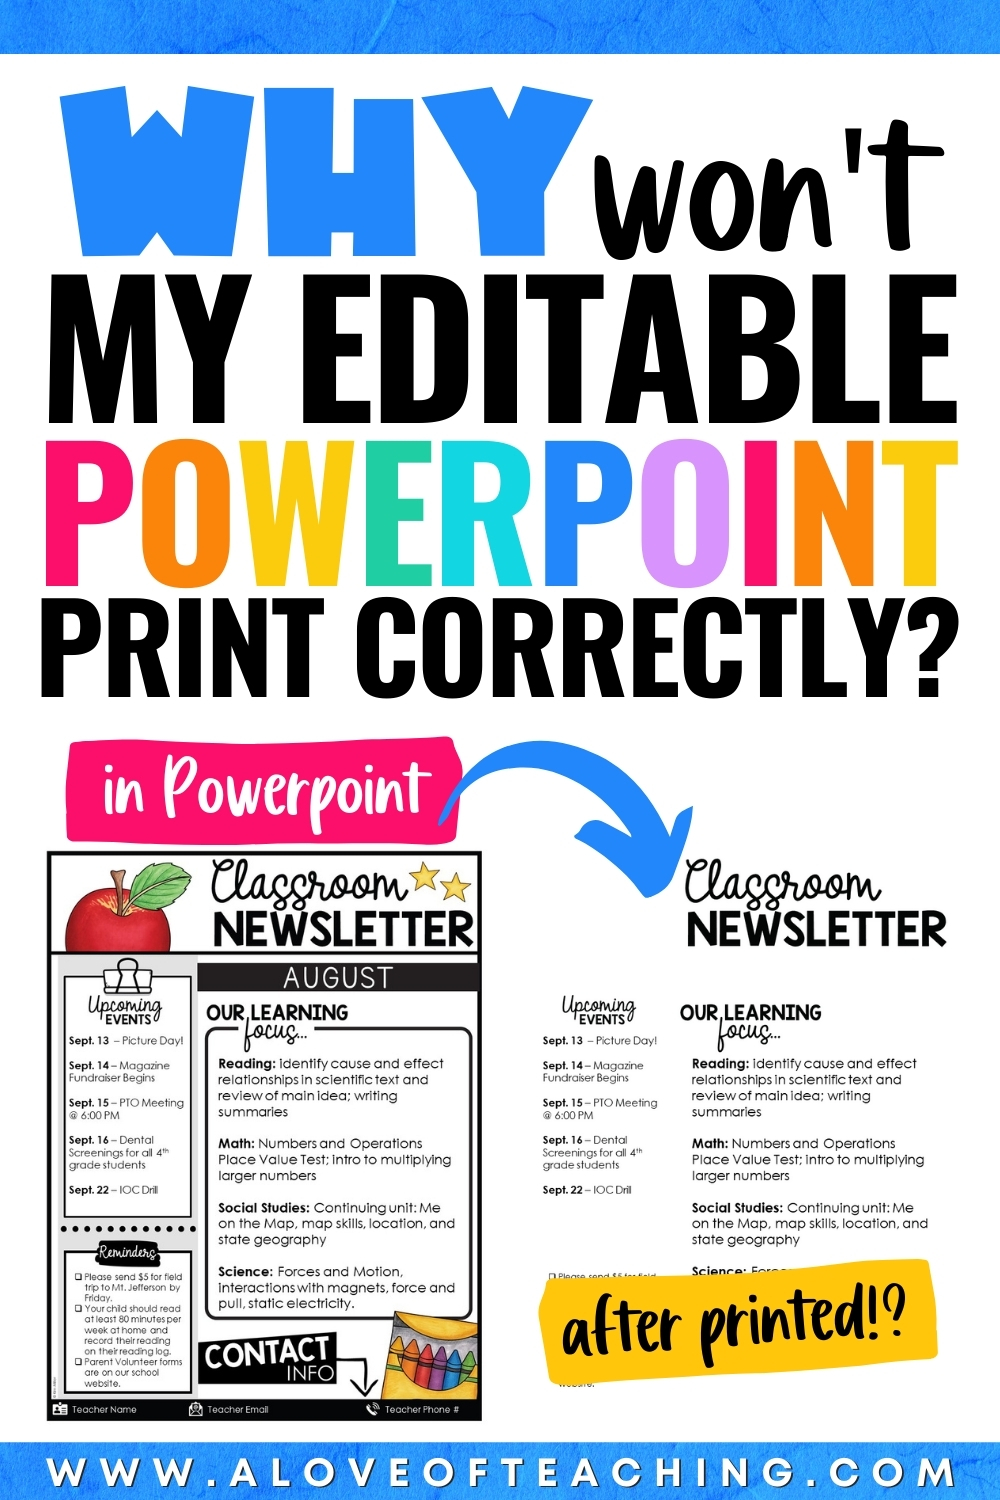 How to Print the Colored Background in an Editable PowerPoint